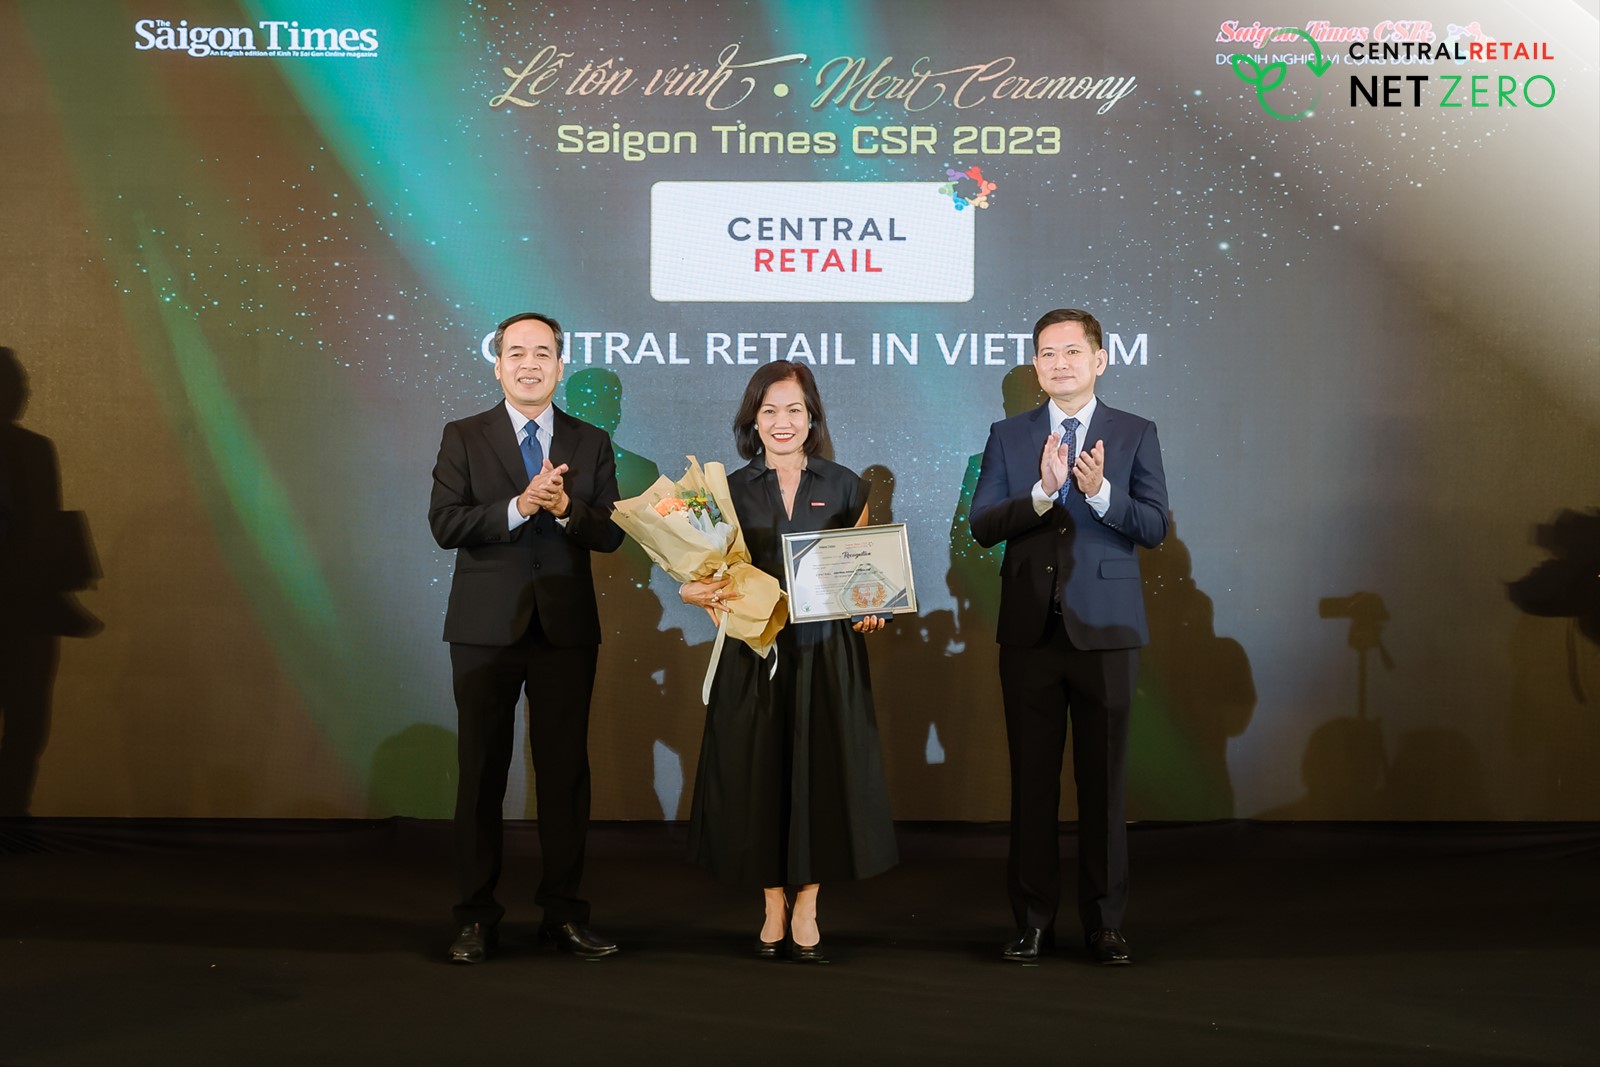 Central Retail in Vietnam was awarded the Saigon Times CSR 2023 Certificate of Recognition for the “Enterprise for the Community in 2023”